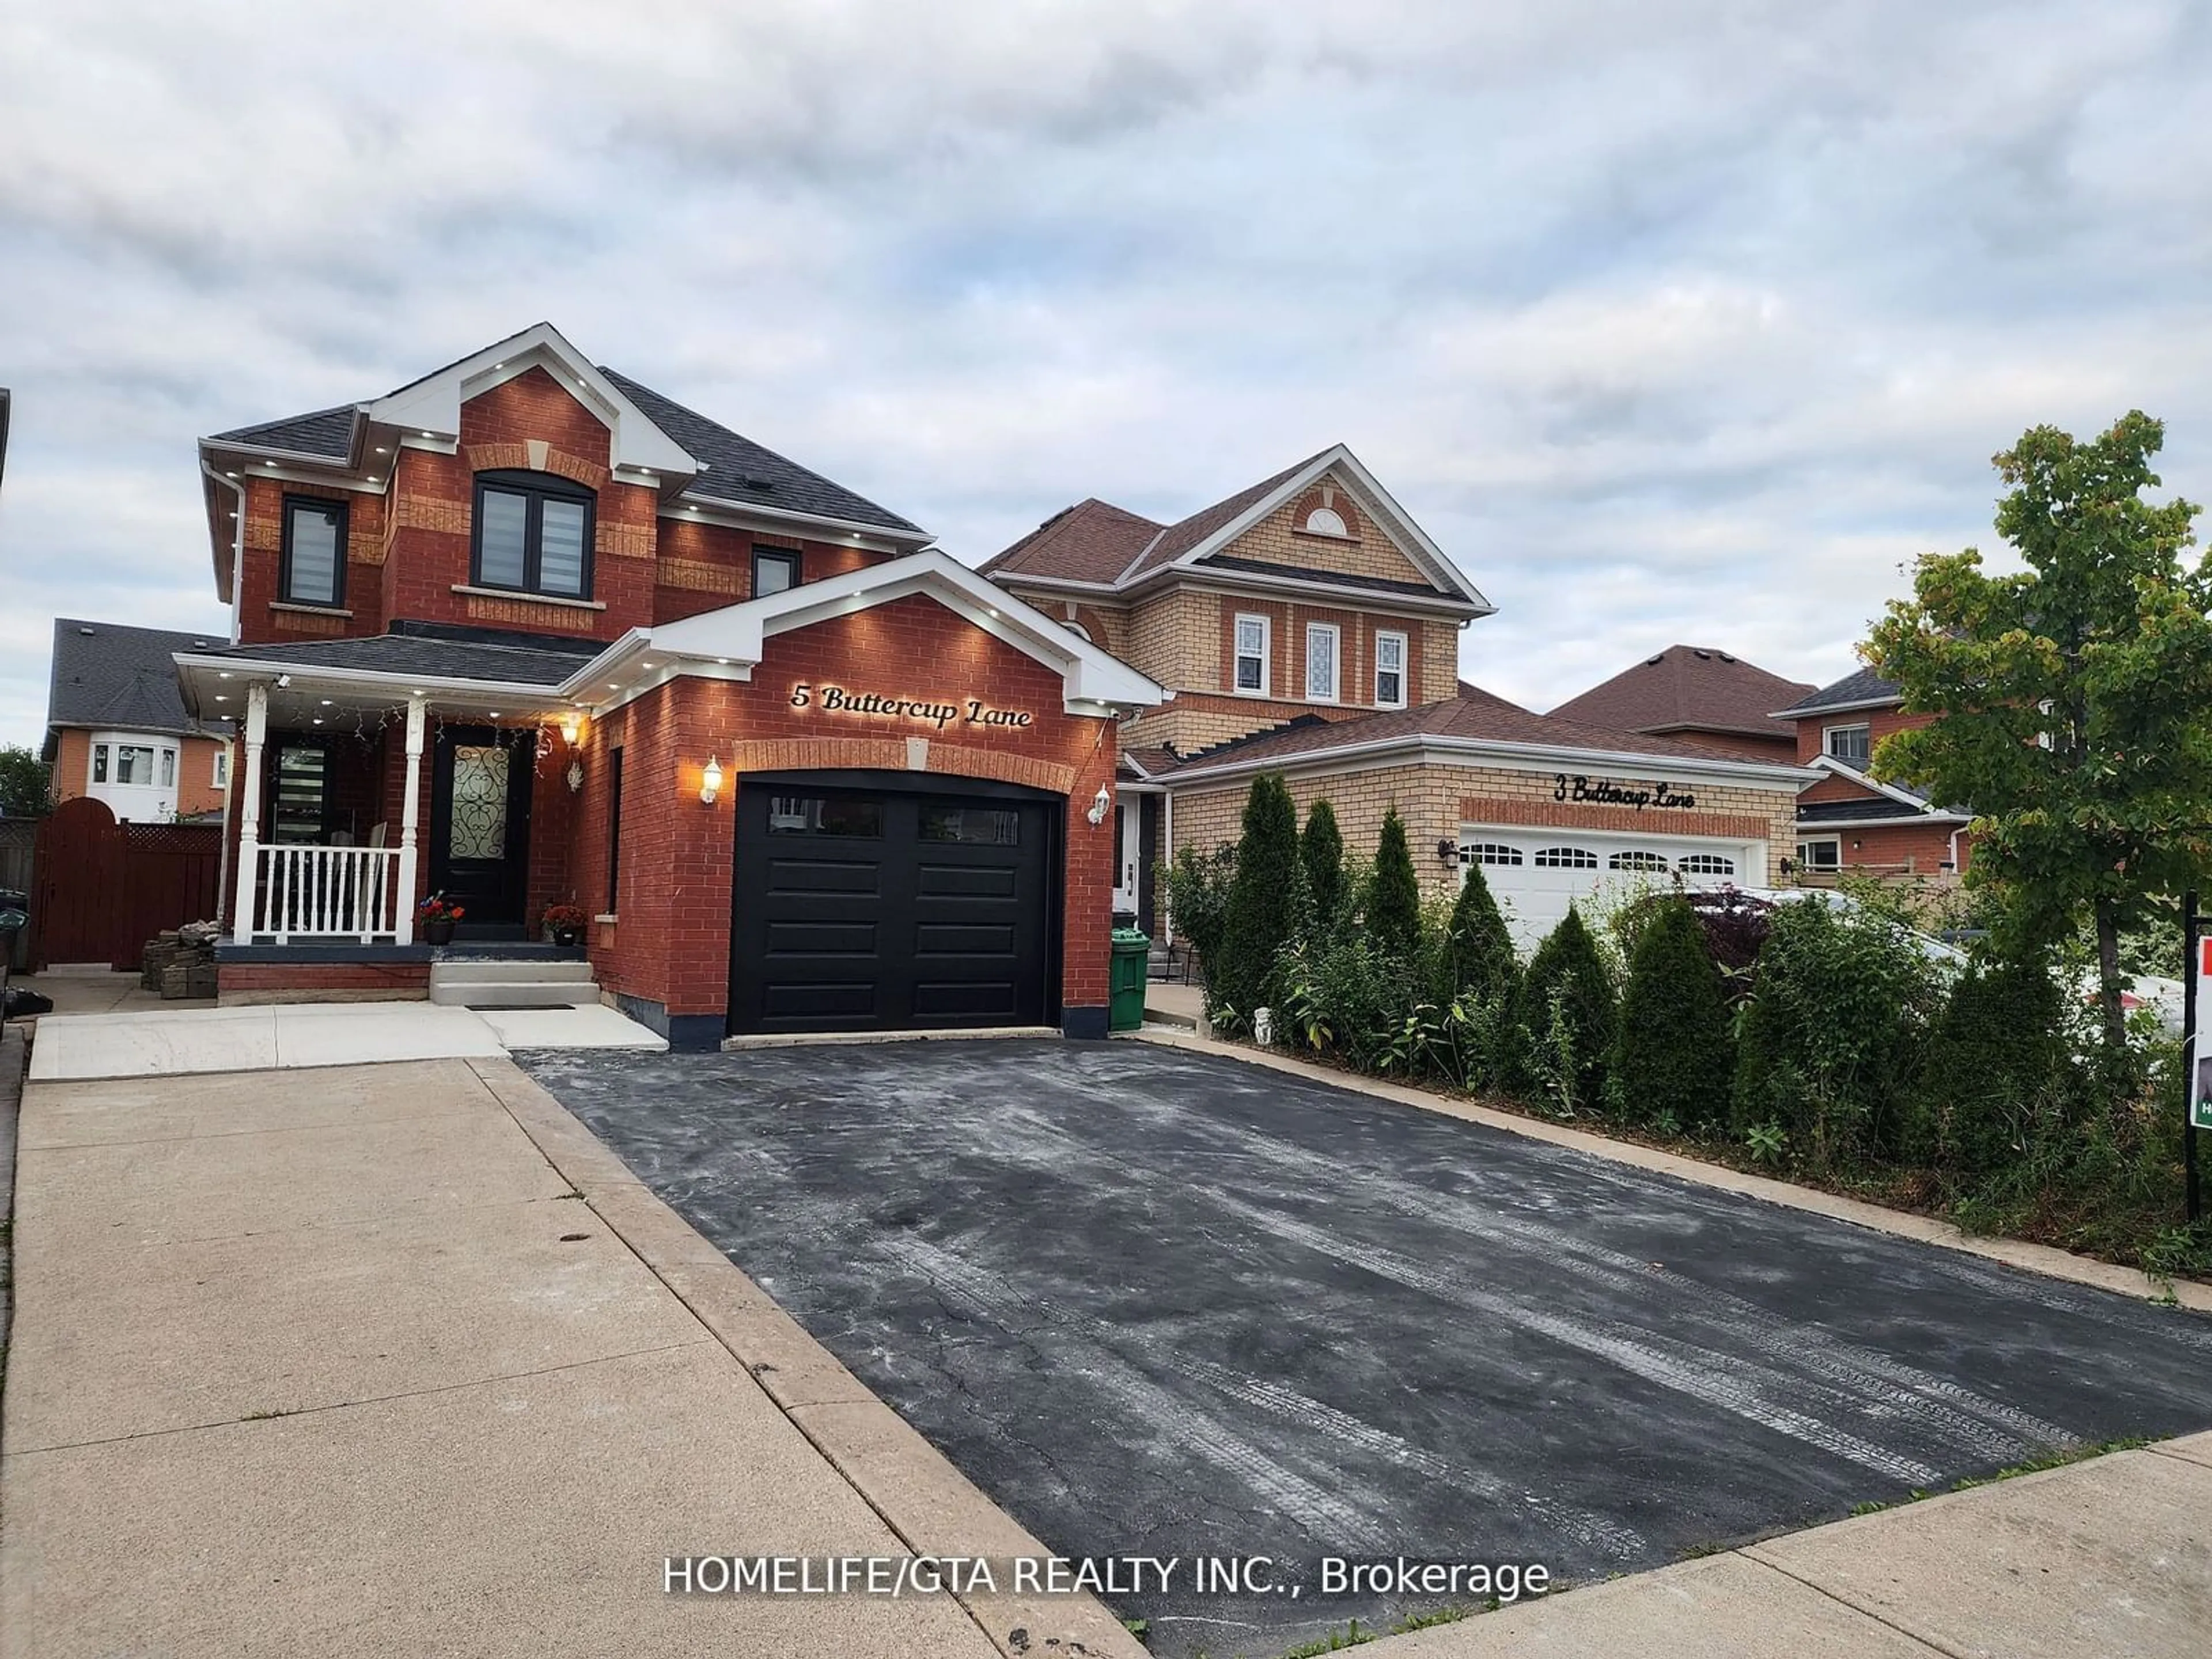 Home with brick exterior material for 5 Buttercup Lane, Brampton Ontario L6R 1M9